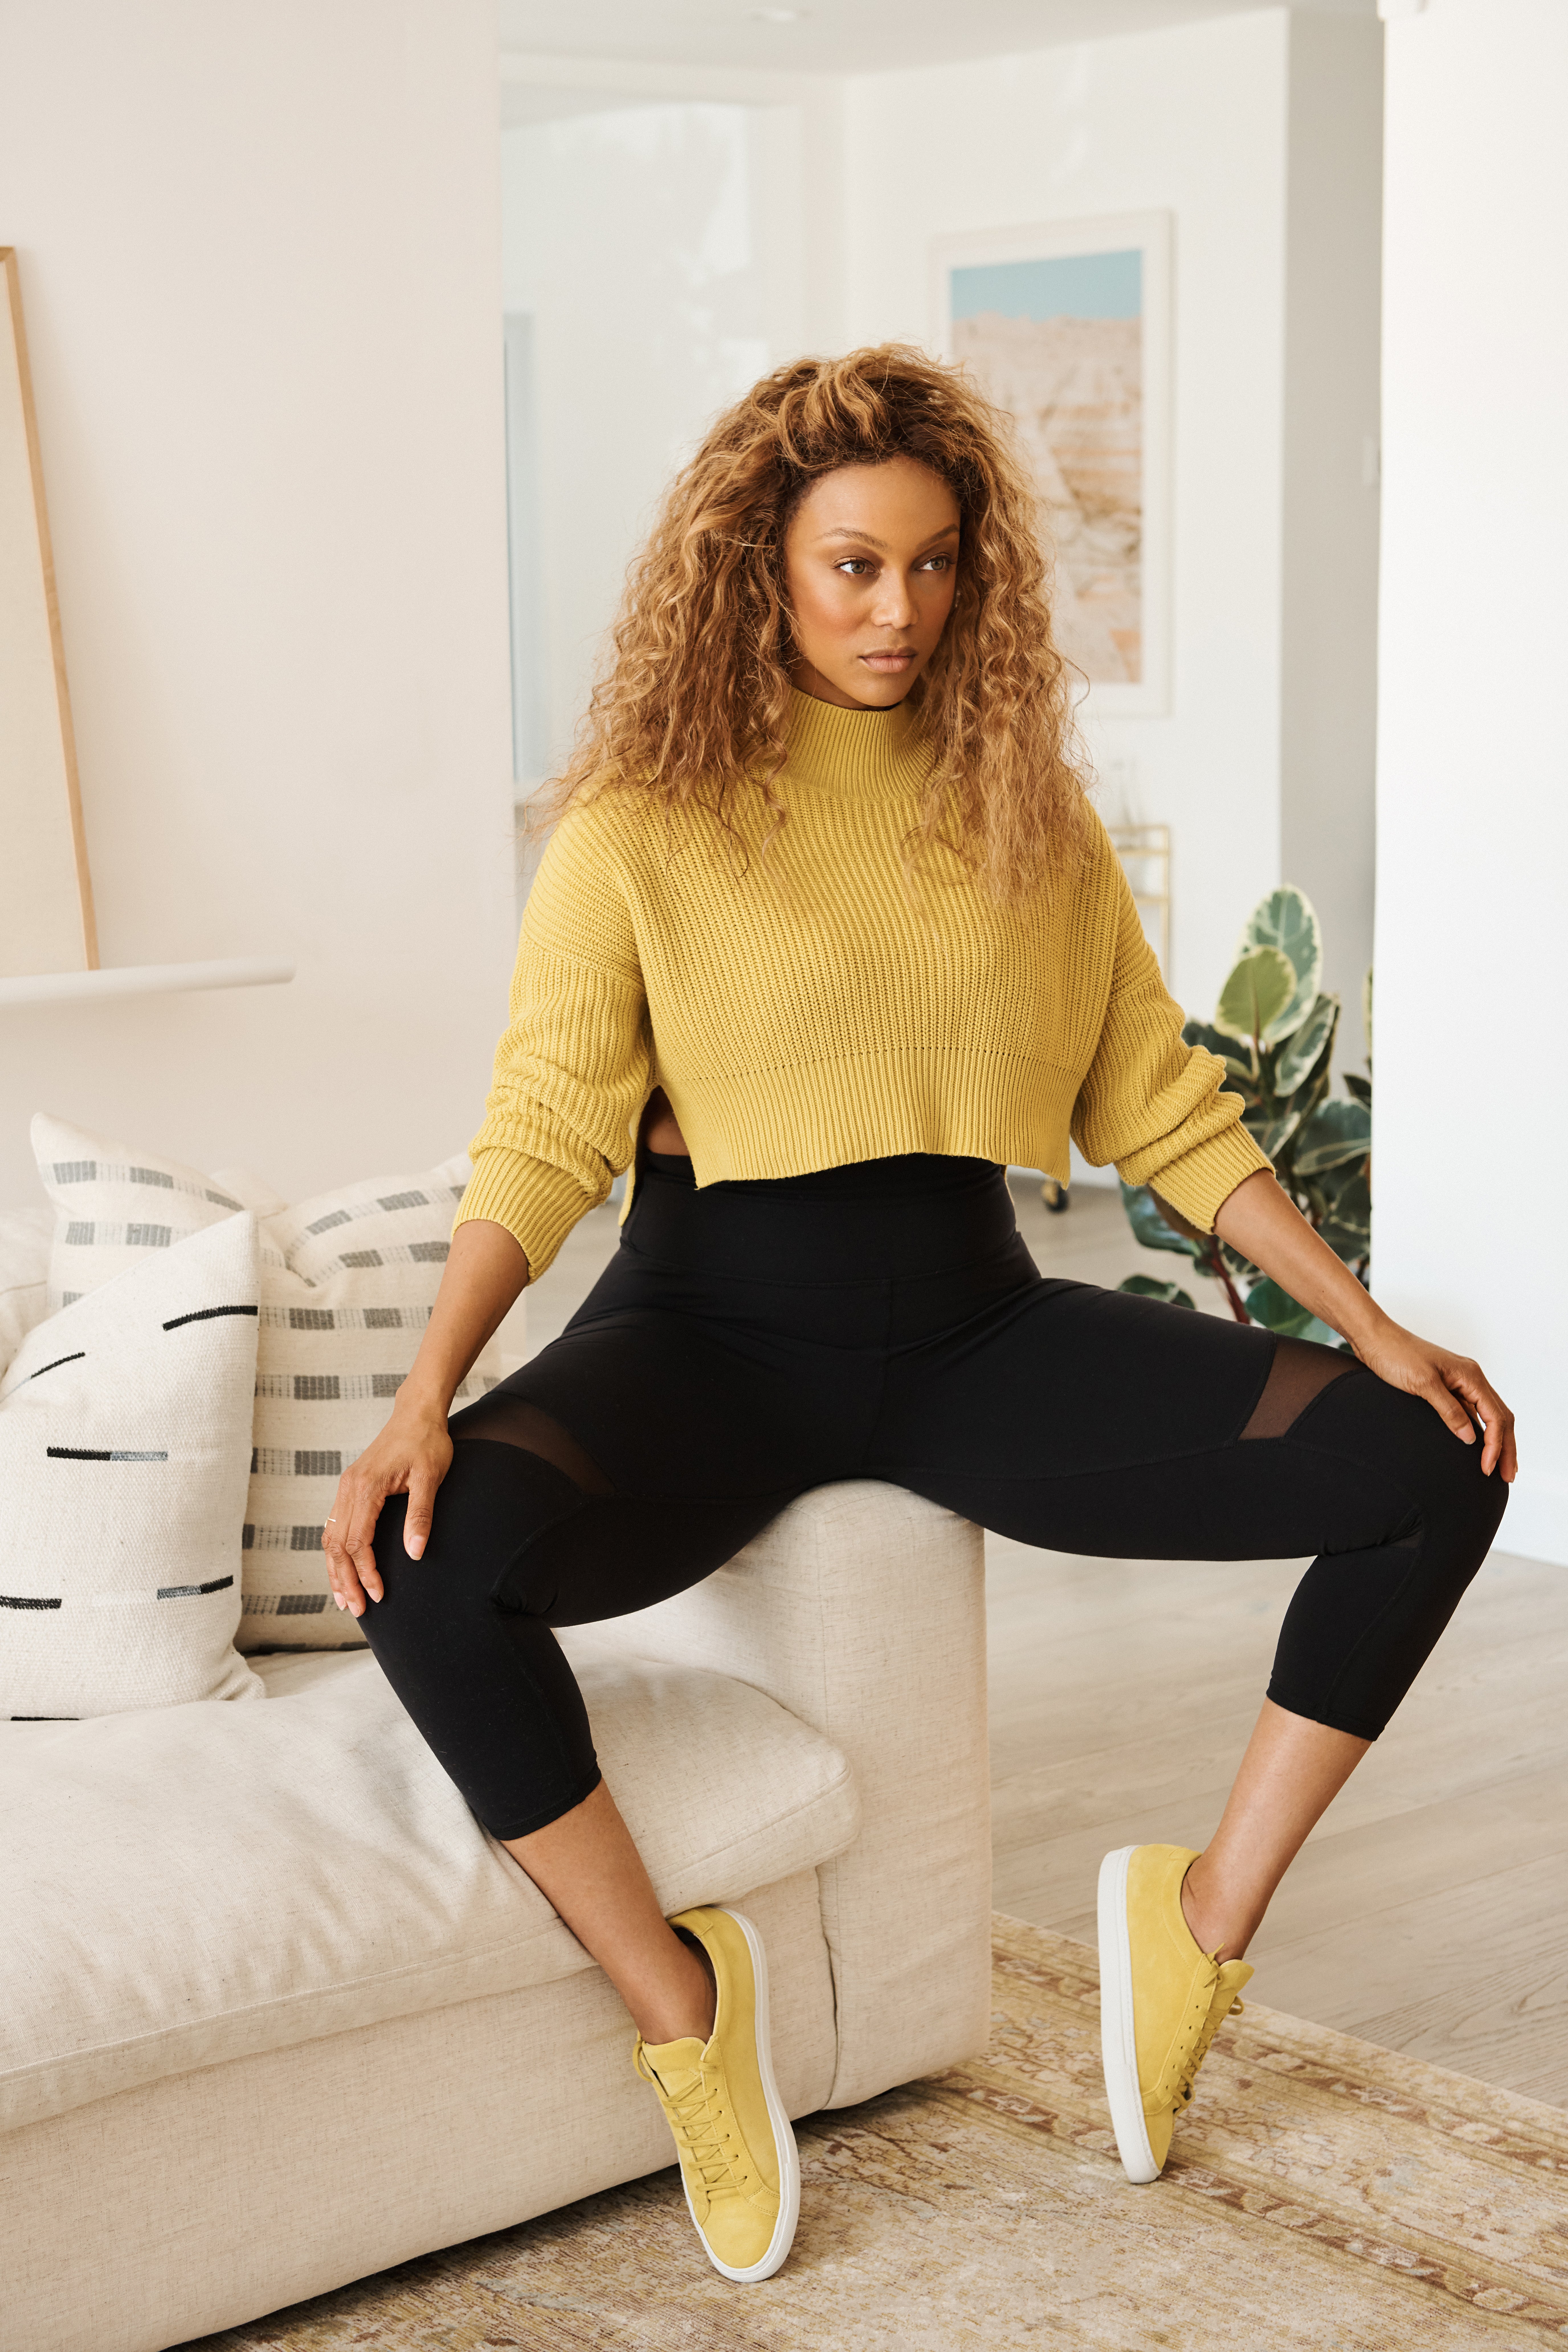 Tyra Banks Shares Her 3 Fashion Must-Haves For Fall